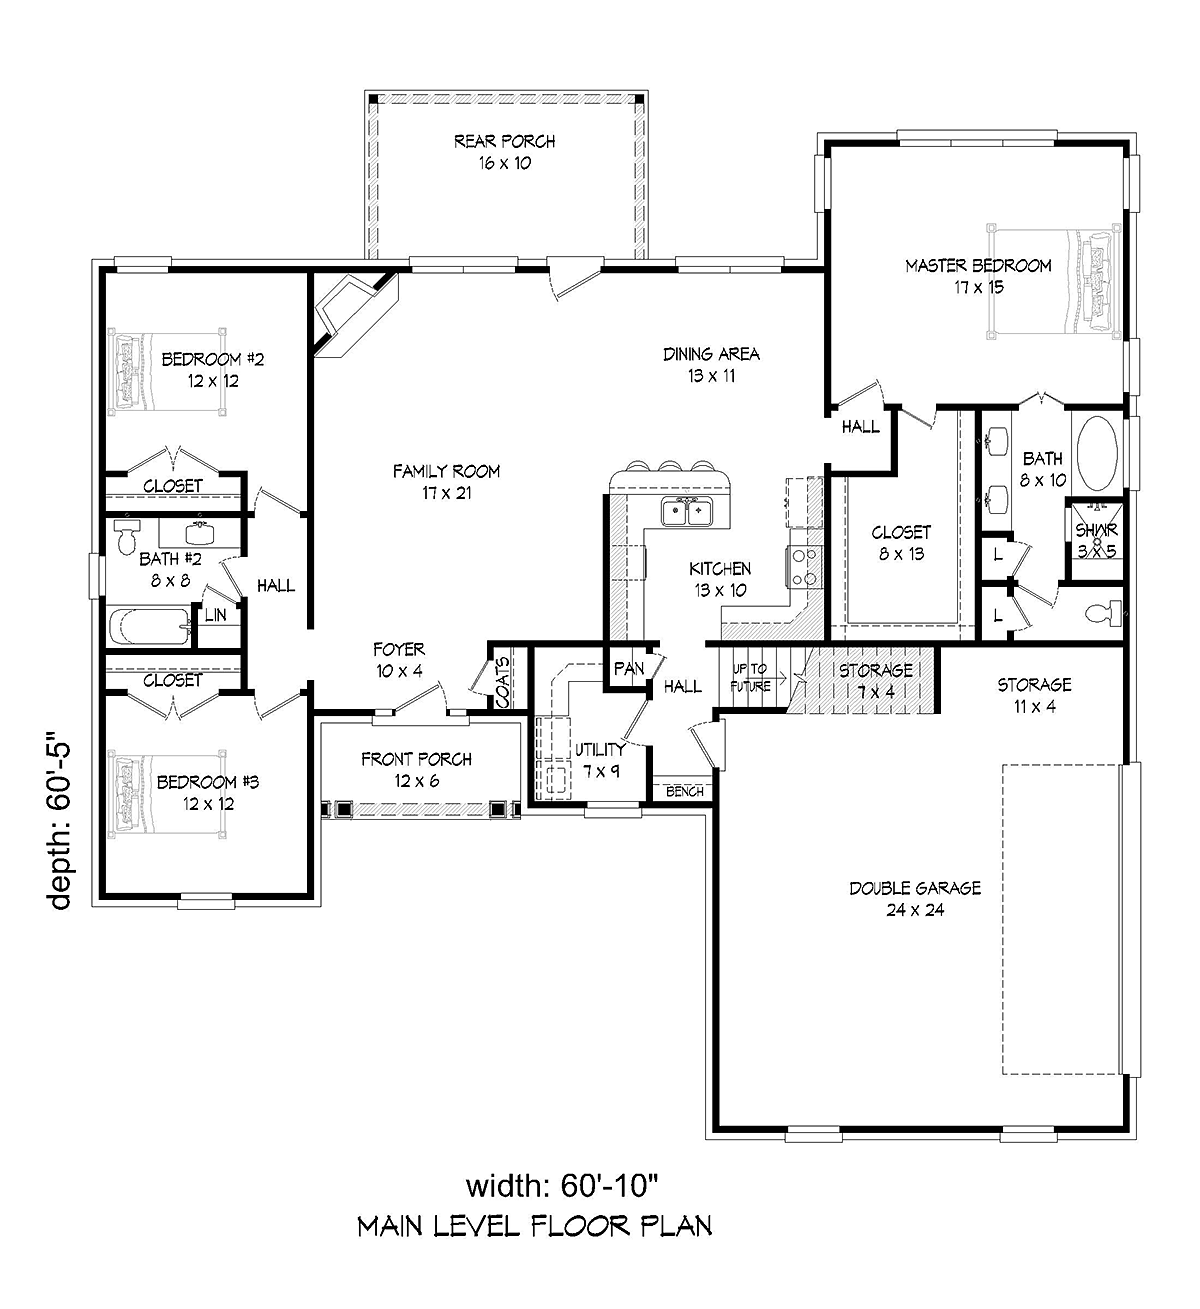 House Plan 51693 Traditional Style with 1900 Sq Ft, 3